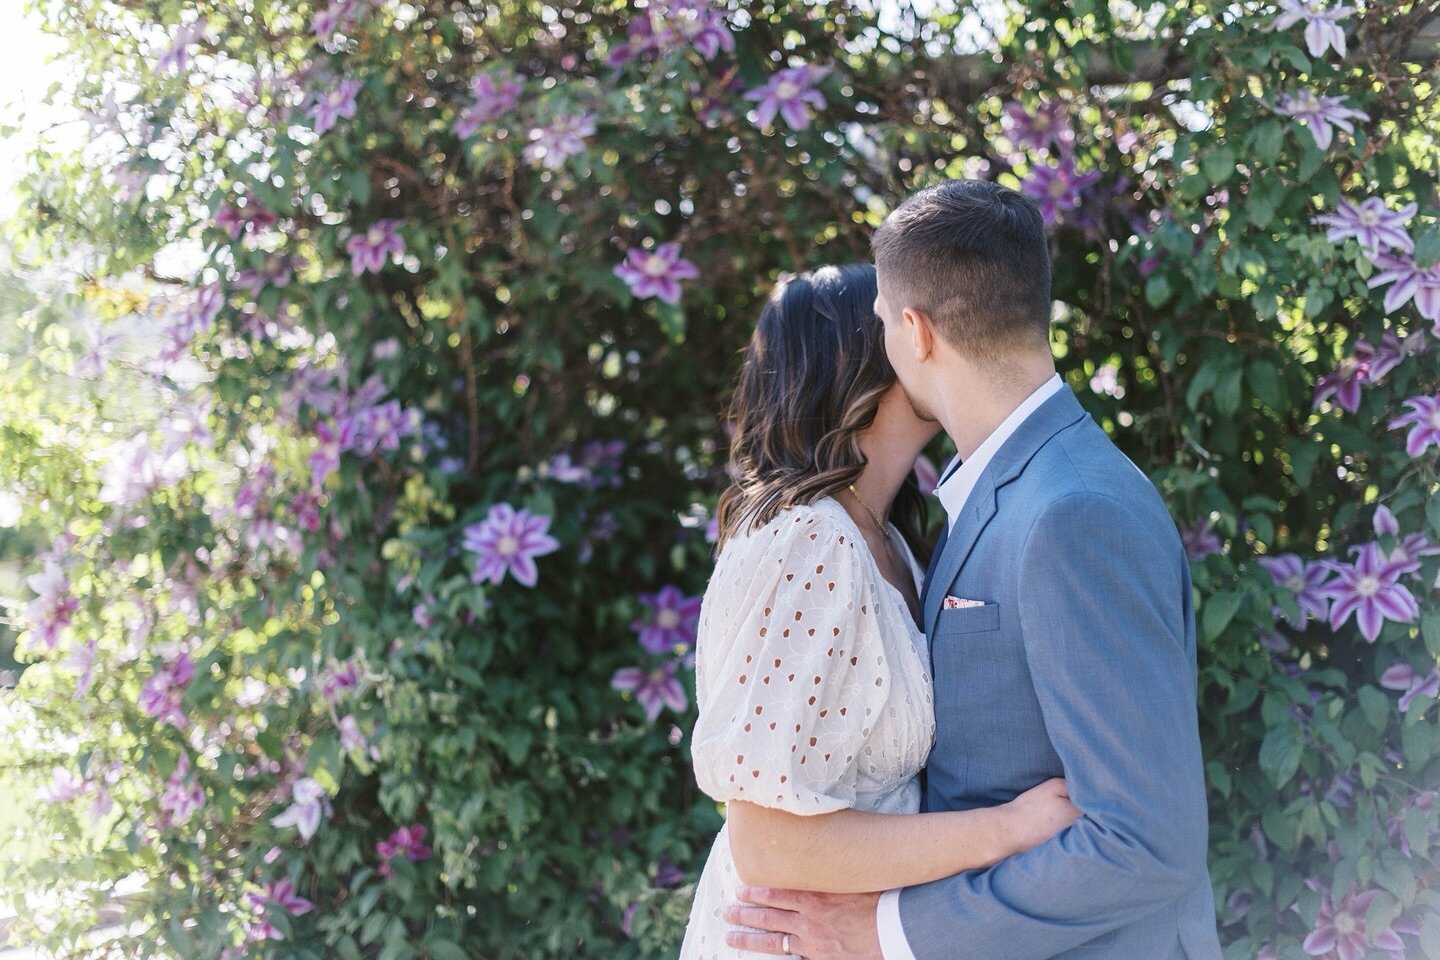 one of my favorite images of K + A from their small, intimate ceremony last spring 🌿 

I don&rsquo;t know about you, but I&rsquo;m ready for more warm, sunshine filled days and moments ✨